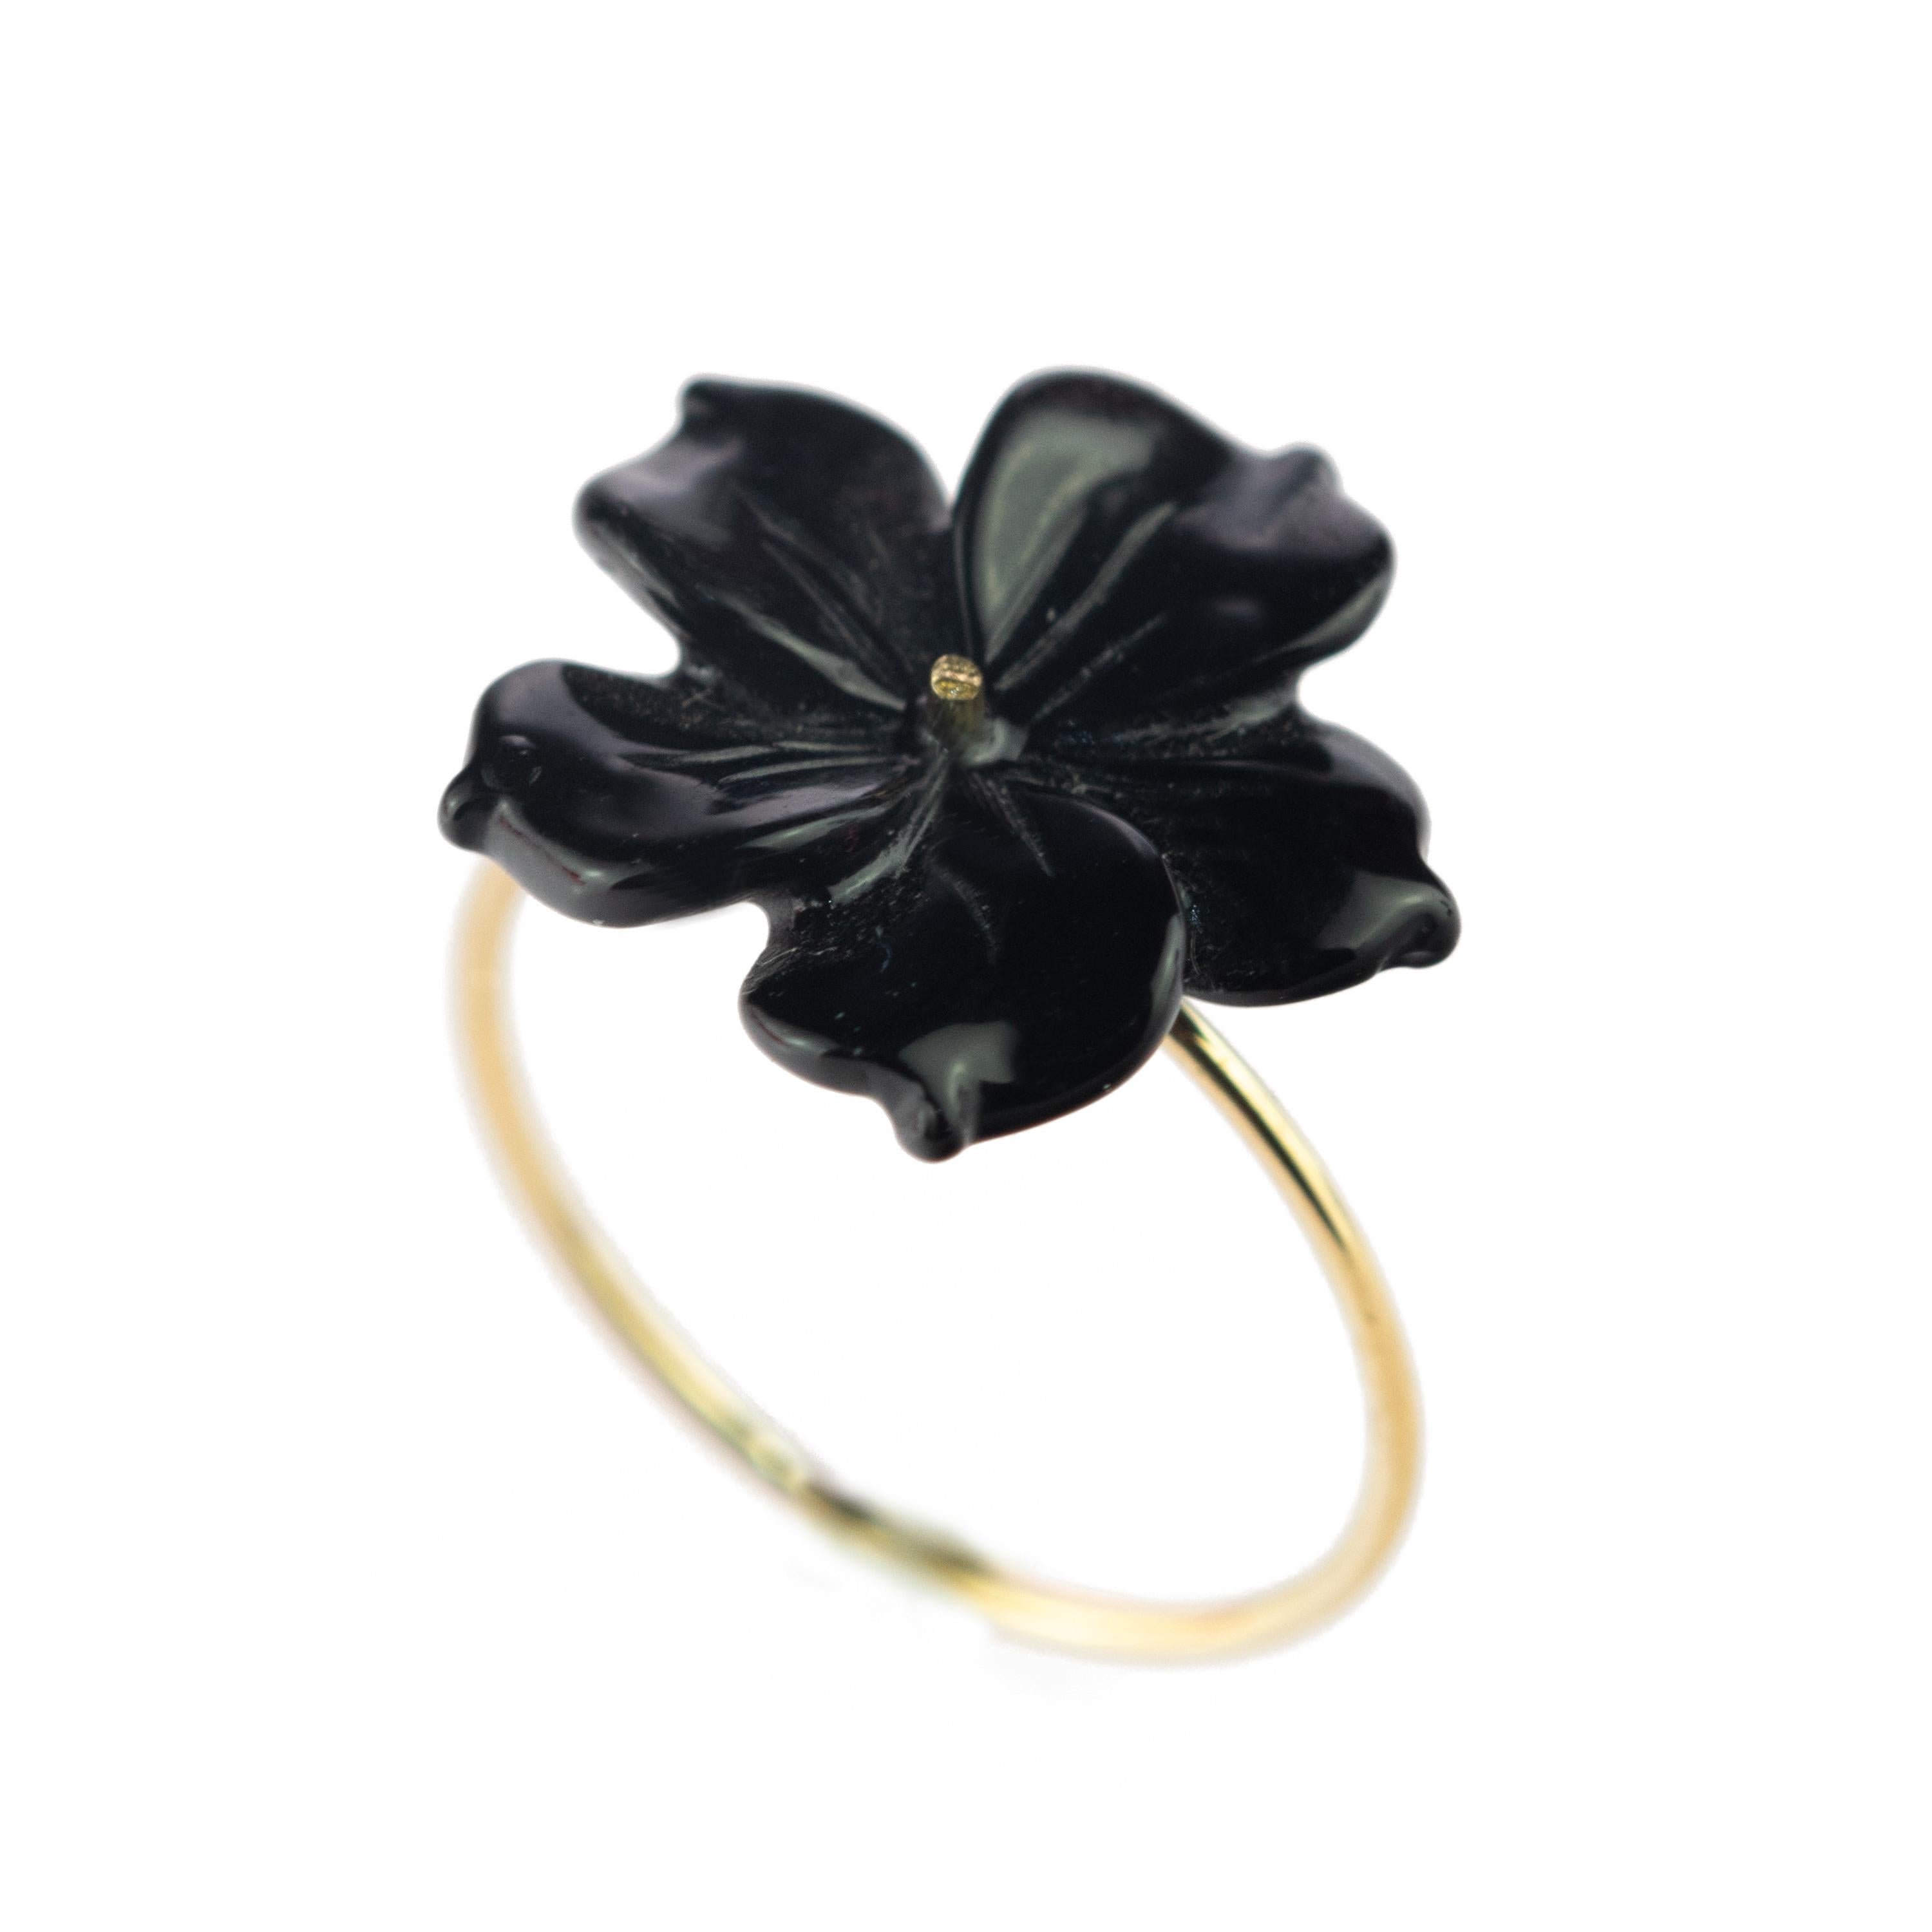 Astonishing and delicate 3.5 carat black agate flower ring. Carved petals that evoke the italian handmade traditional jewelry work, wrapping itself in a soft look enriched with 18 karat yellow gold manifesting glamour and exquisite taste. Cocktail